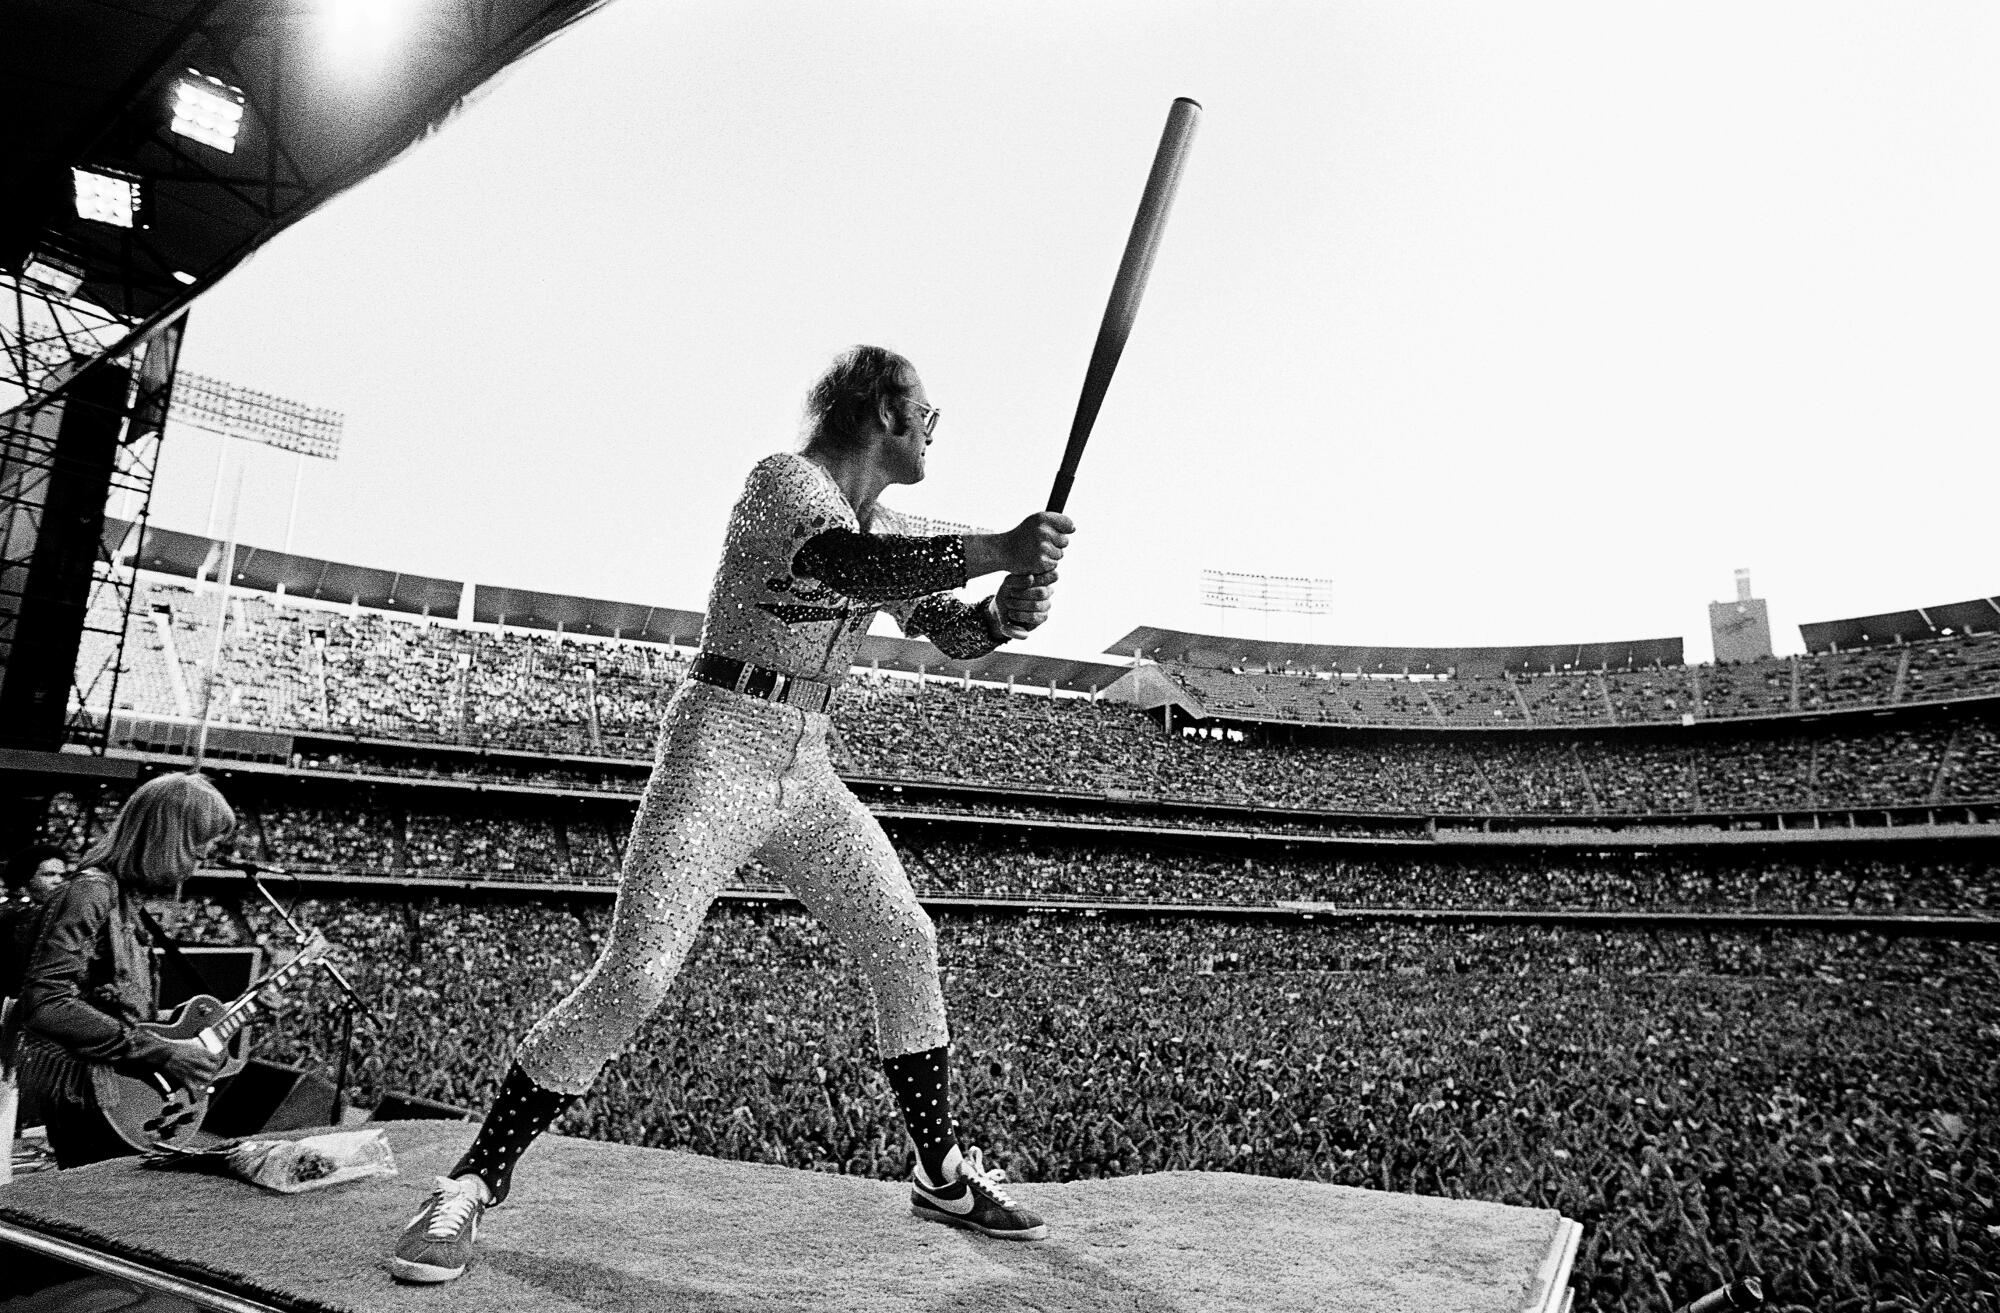 A rock musician stands atop a piano wielding a baseball bat in front of a stadium full of fans.